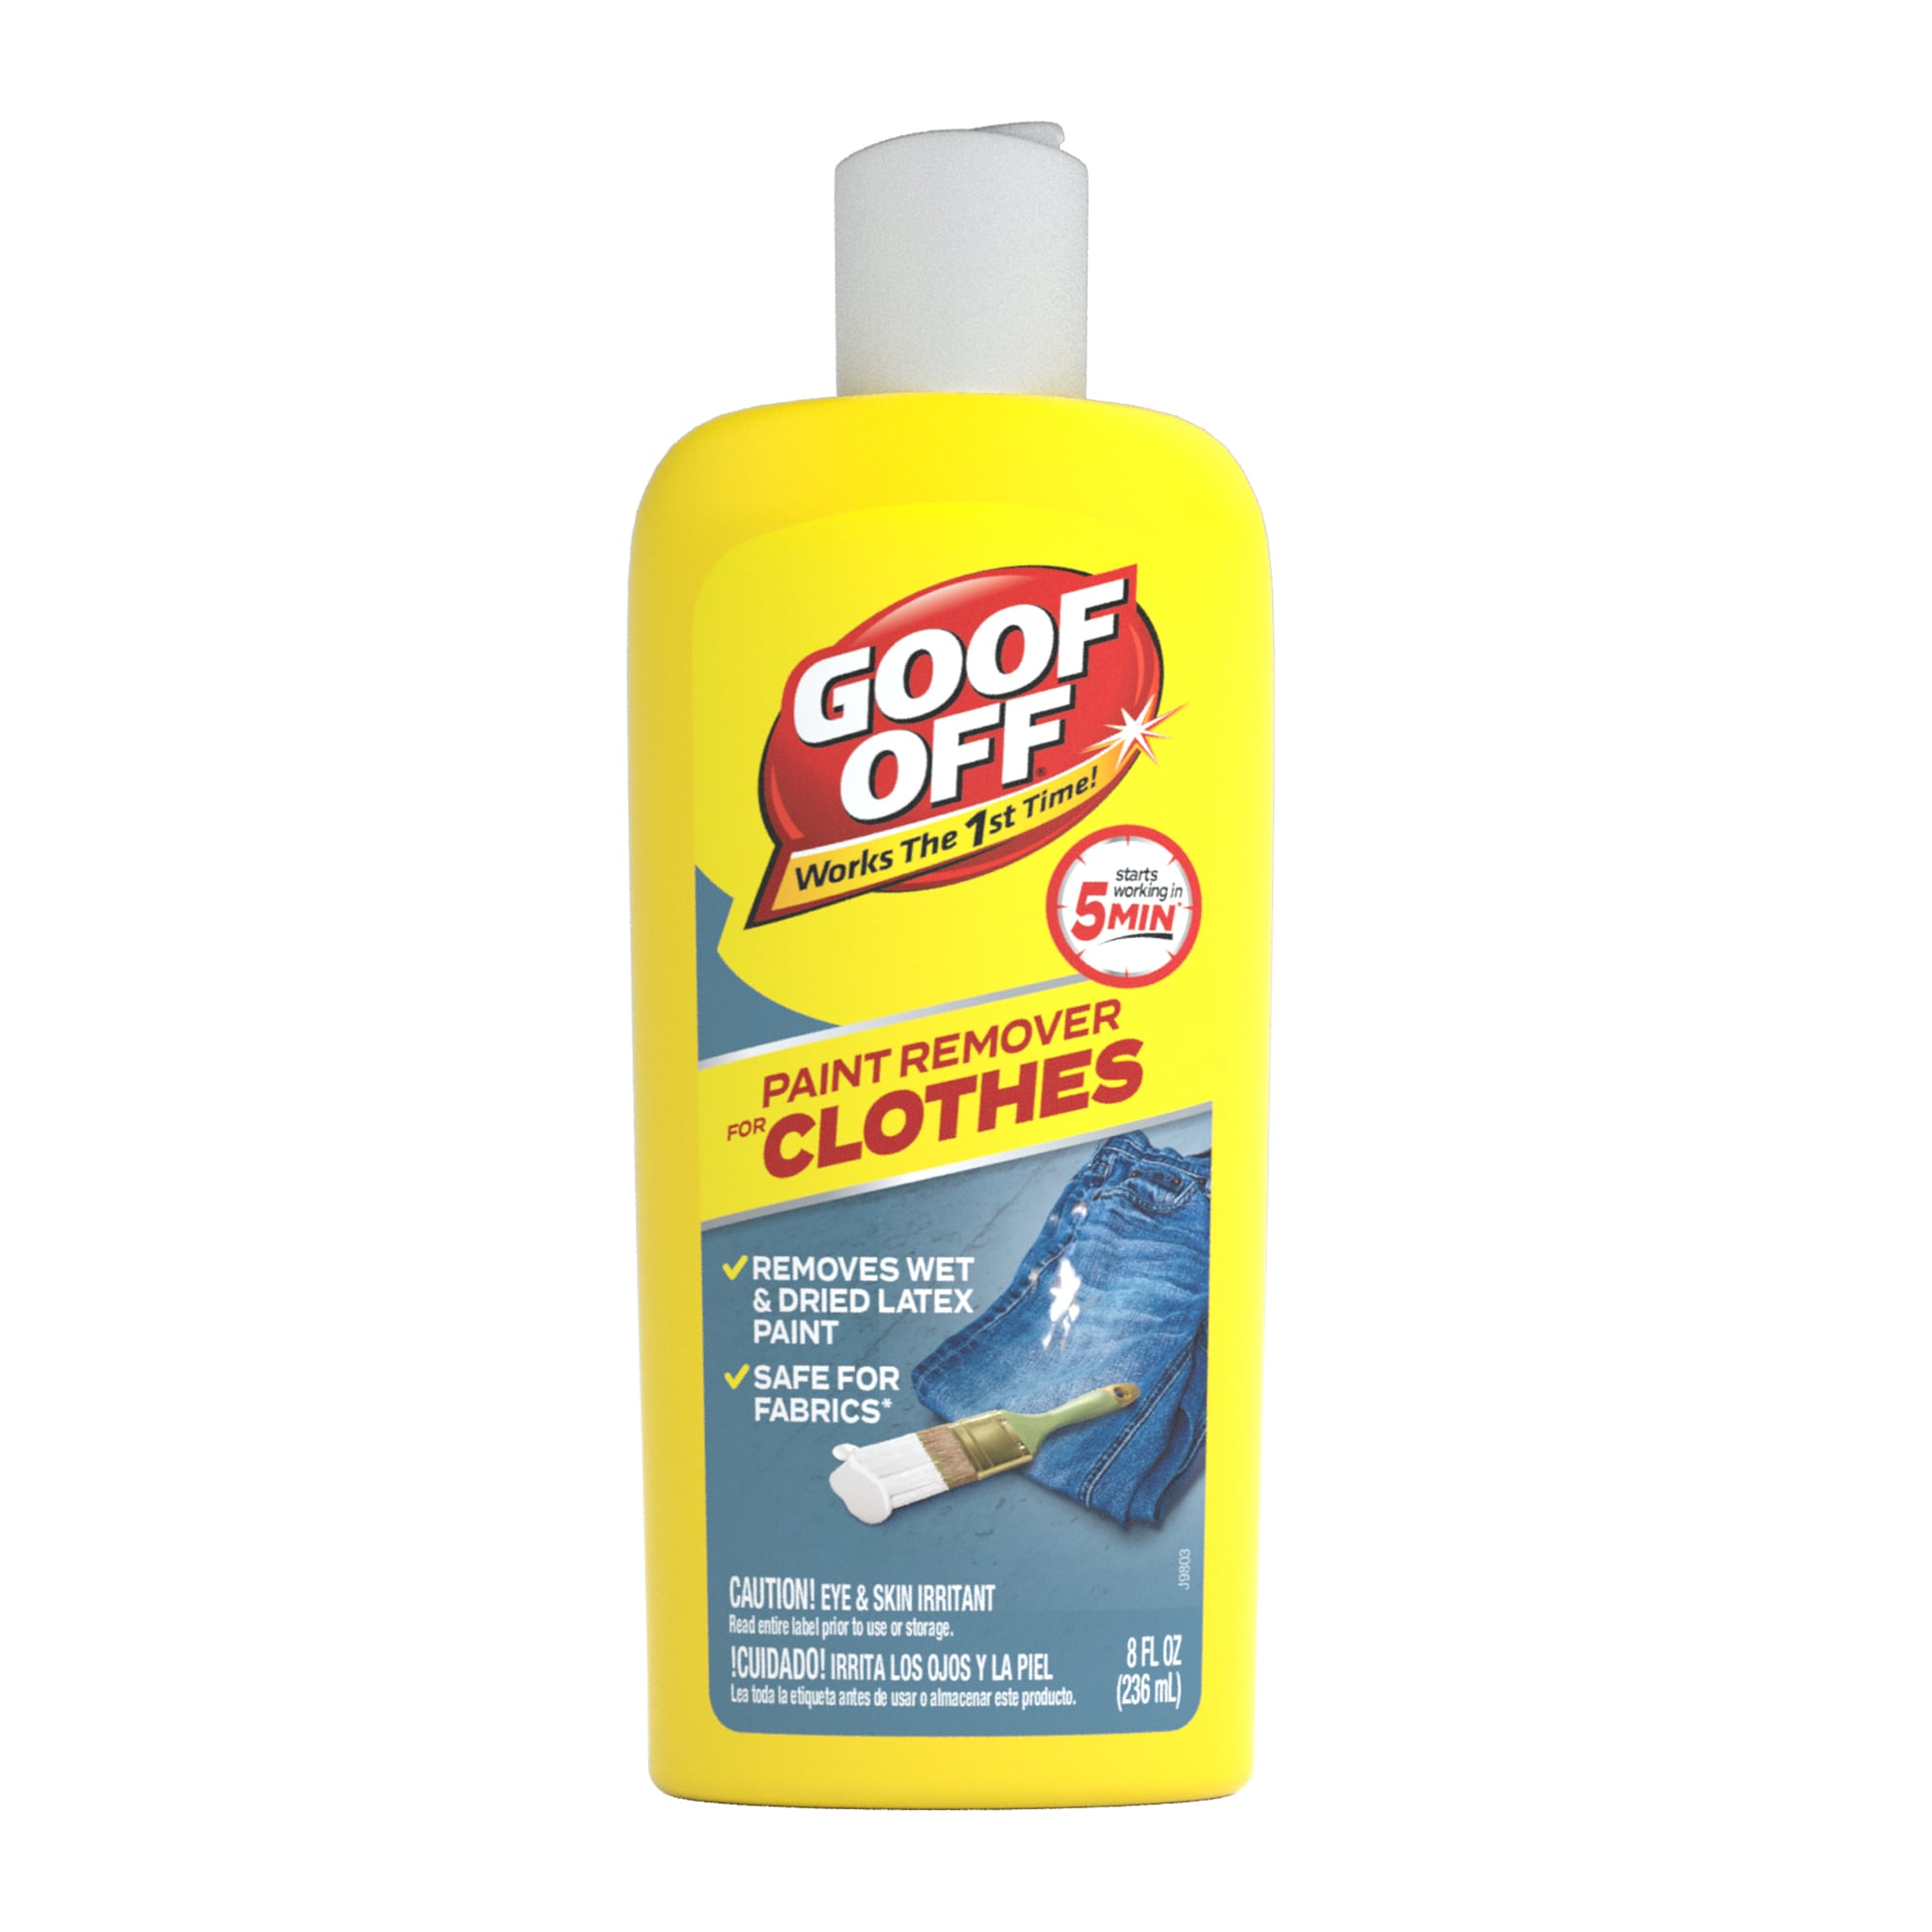 Goof Off FG910 12 Ounce Paint Remover For Carpet: Paint Strippers